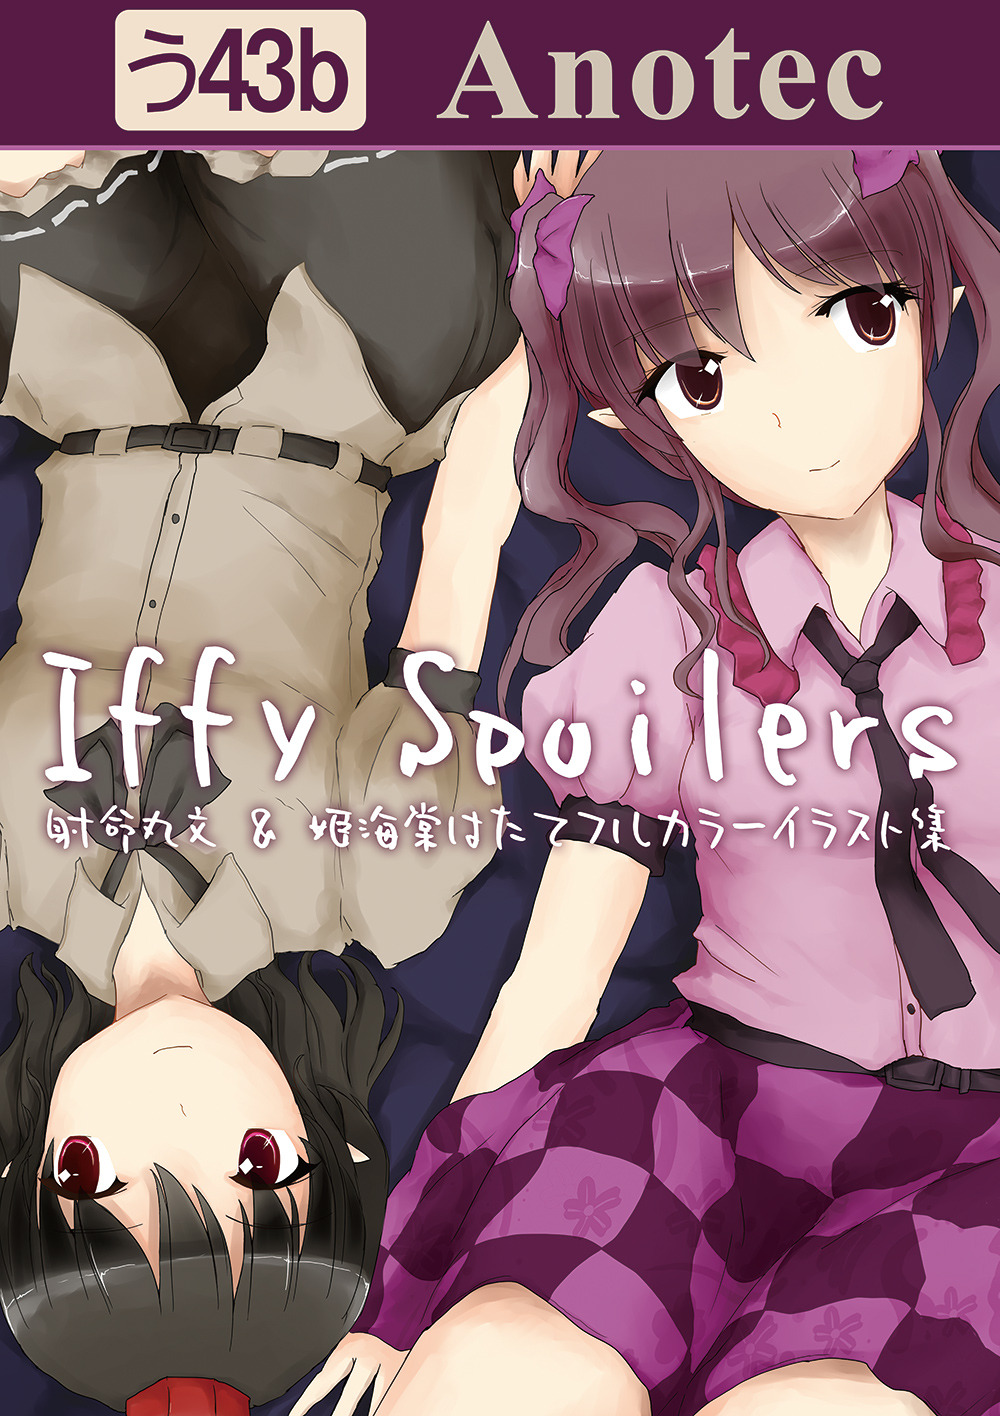 Iffy Spoilers表紙